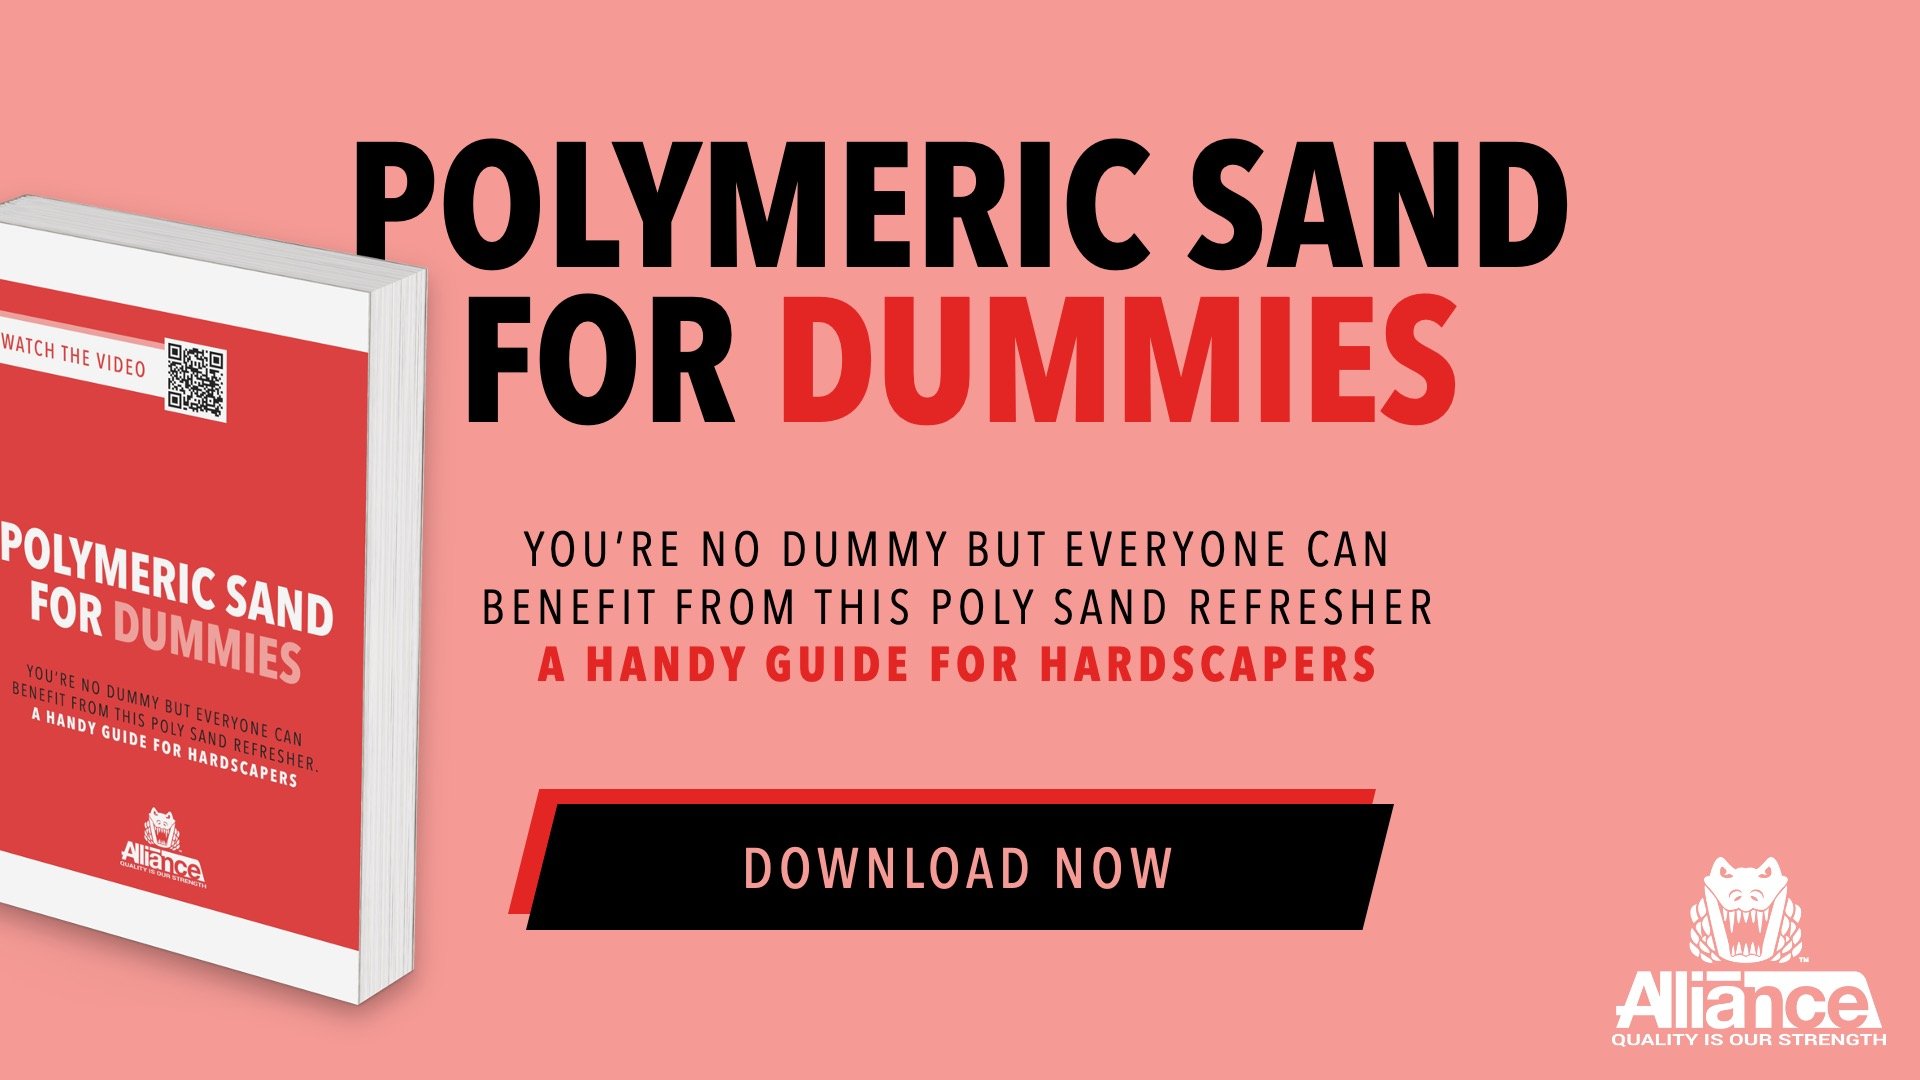 Polymeric Sand for Dummies Guide CTA